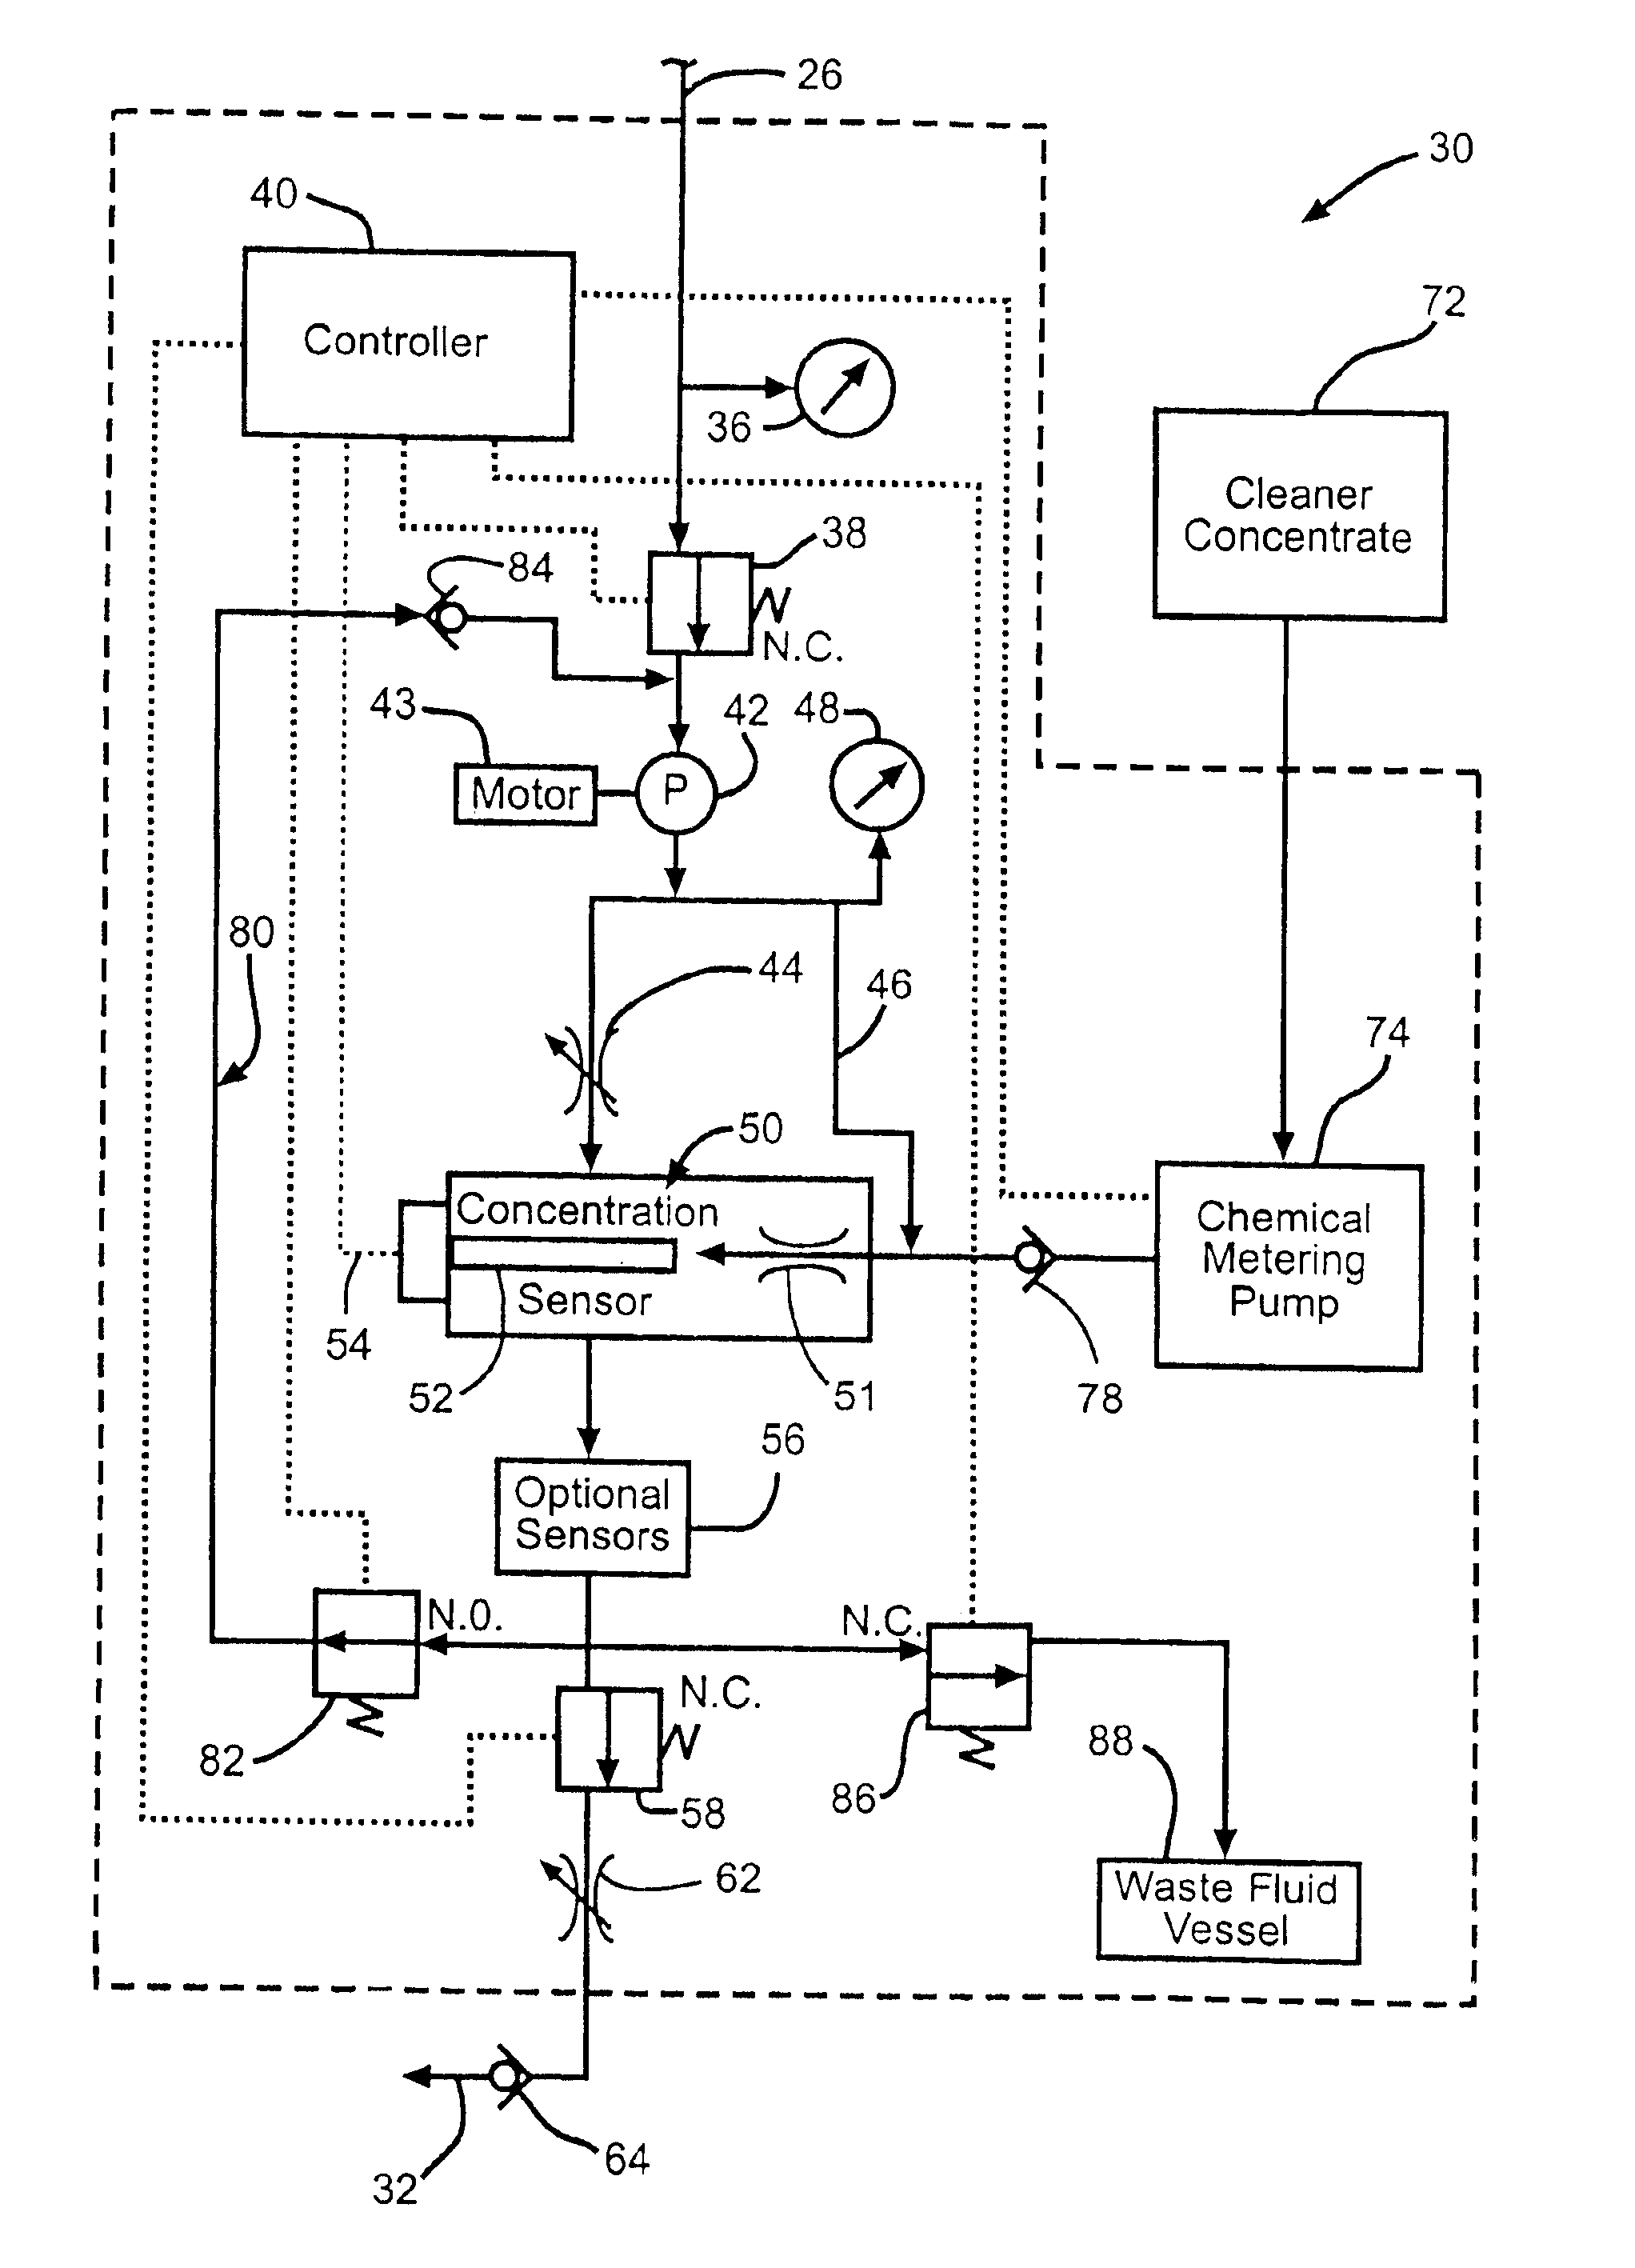 Method and apparatus for measuring a variable in a lubricant/coolant system